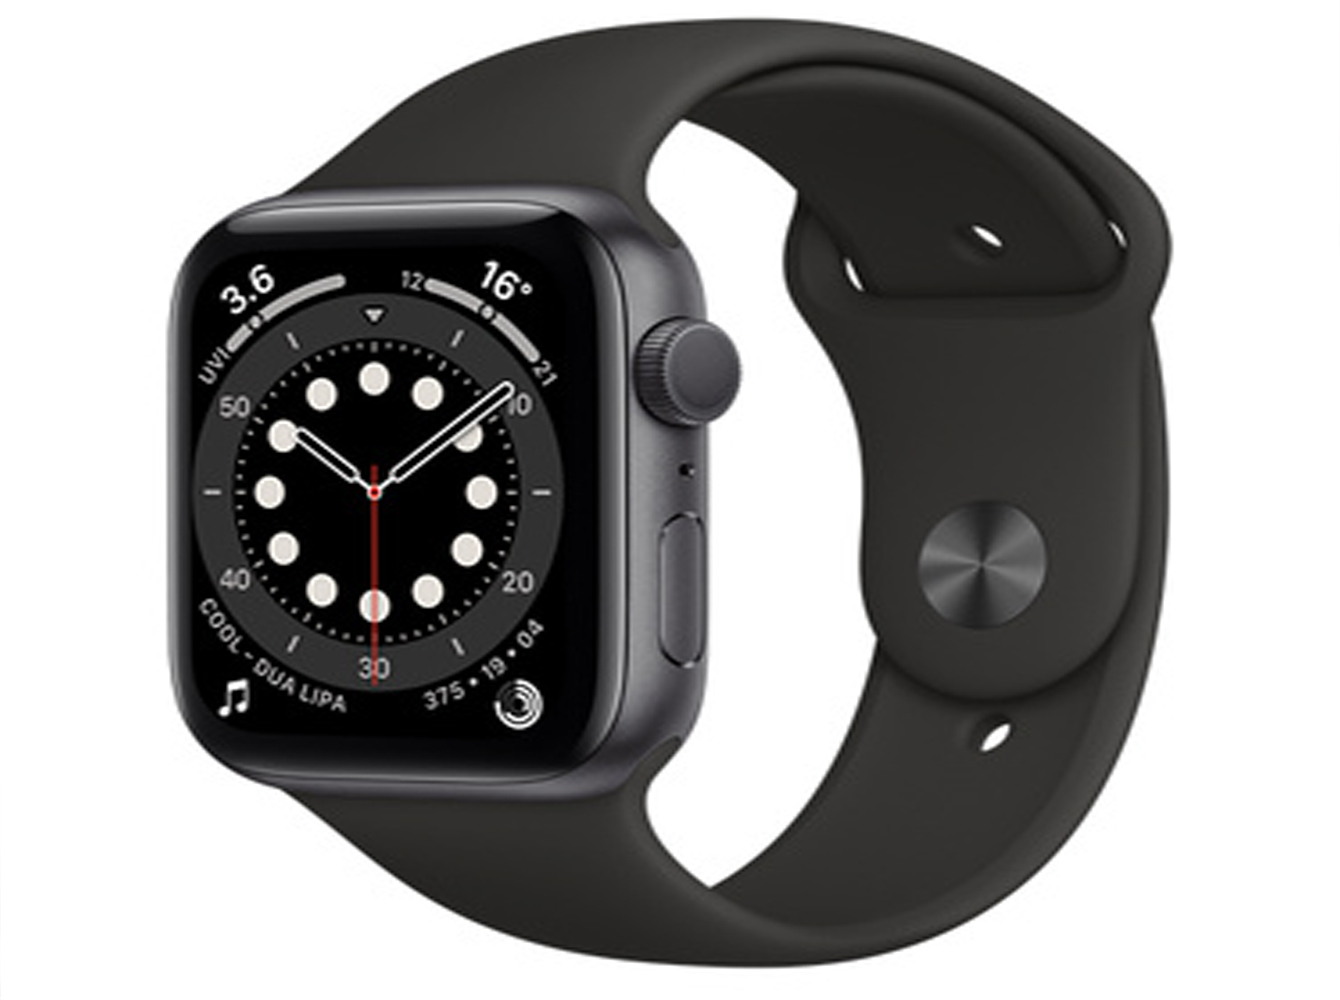 Apple Watch Series 6 GPS+Cellular, 44mm-Aluminium Case with White Sport Band Click For More Color&Price